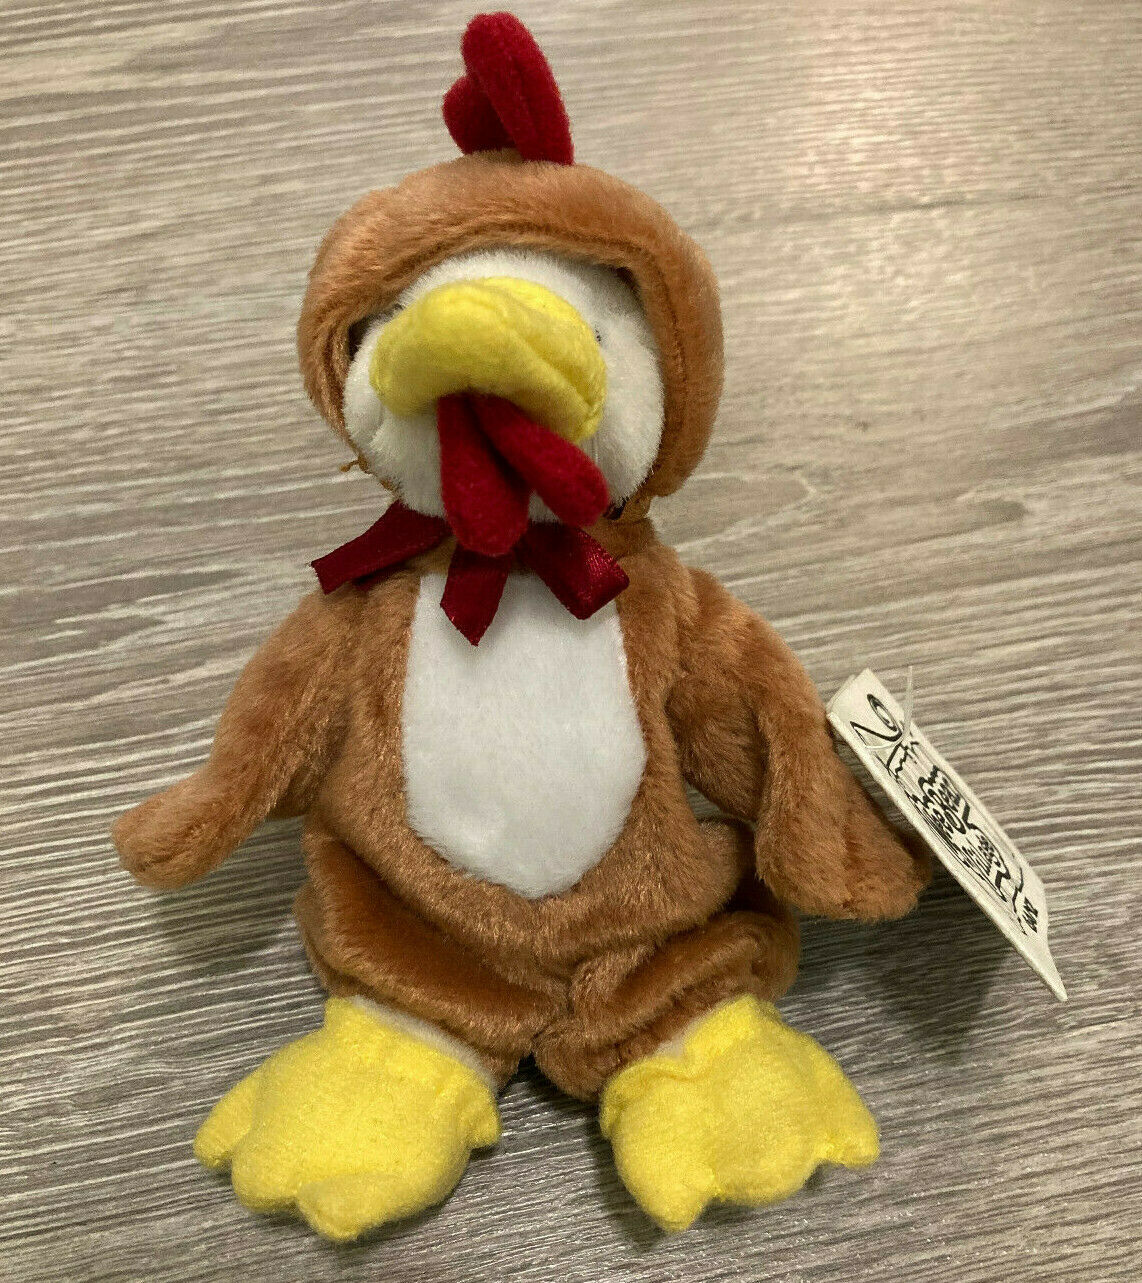 Ganz Doodle Plush 5" Rooster Teddy Wee Bear Village Chicken Tiny Costume Stuffed